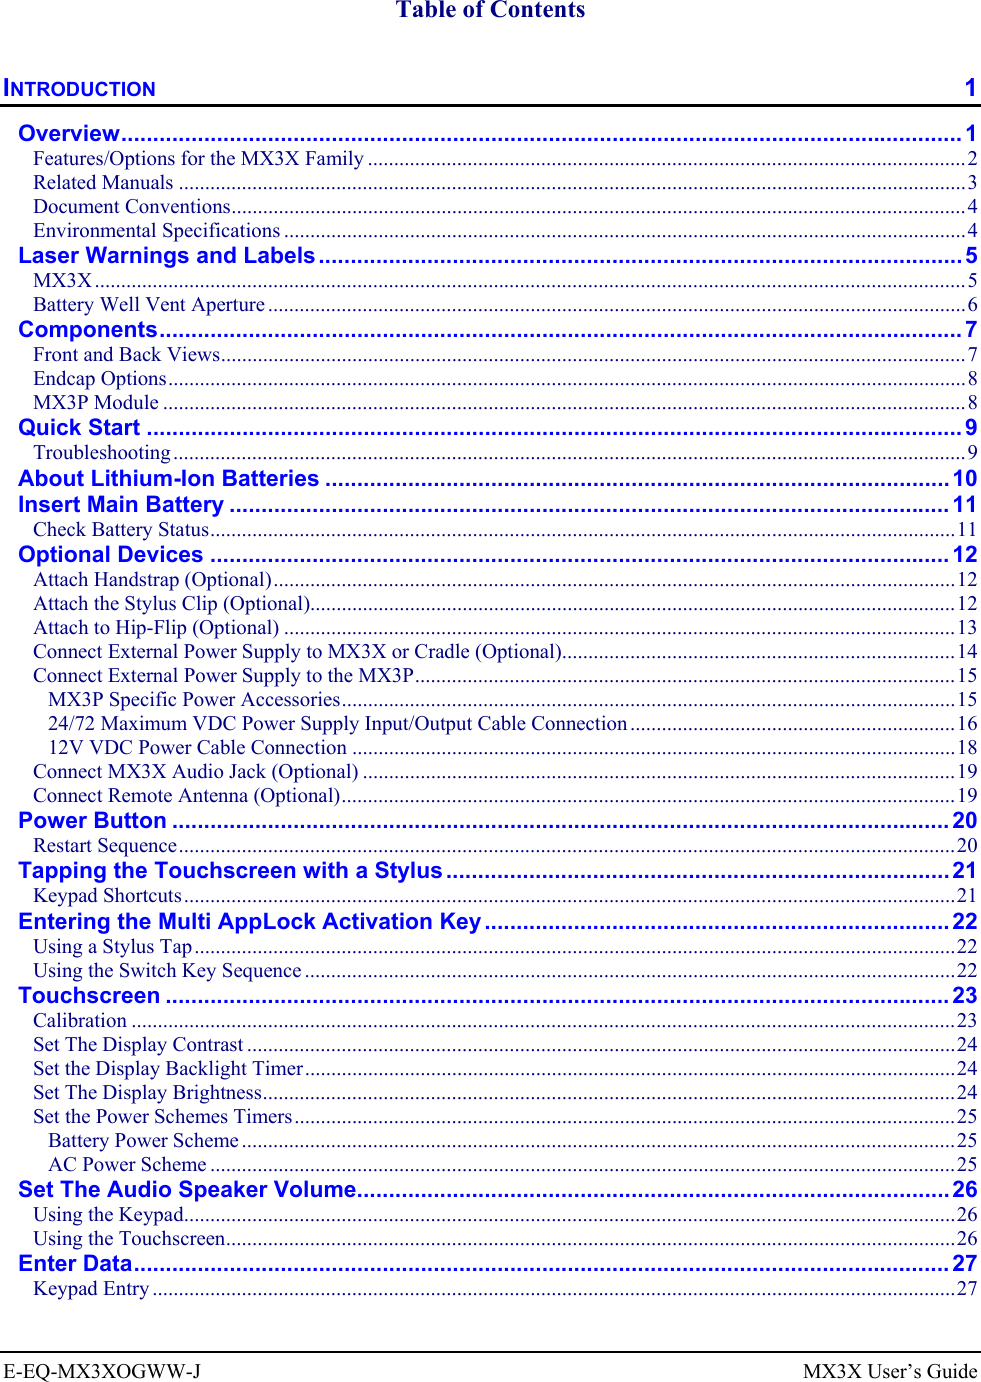  E-EQ-MX3XOGWW-J  MX3X User’s Guide  Table of Contents INTRODUCTION  1 Overview.................................................................................................................................... 1 Features/Options for the MX3X Family ..................................................................................................................2 Related Manuals ......................................................................................................................................................3 Document Conventions............................................................................................................................................4 Environmental Specifications ..................................................................................................................................4 Laser Warnings and Labels..................................................................................................... 5 MX3X ......................................................................................................................................................................5 Battery Well Vent Aperture.....................................................................................................................................6 Components.............................................................................................................................. 7 Front and Back Views..............................................................................................................................................7 Endcap Options........................................................................................................................................................8 MX3P Module .........................................................................................................................................................8 Quick Start ................................................................................................................................9 Troubleshooting .......................................................................................................................................................9 About Lithium-Ion Batteries ..................................................................................................10 Insert Main Battery .................................................................................................................11 Check Battery Status..............................................................................................................................................11 Optional Devices ....................................................................................................................12 Attach Handstrap (Optional)..................................................................................................................................12 Attach the Stylus Clip (Optional)...........................................................................................................................12 Attach to Hip-Flip (Optional) ................................................................................................................................13 Connect External Power Supply to MX3X or Cradle (Optional)...........................................................................14 Connect External Power Supply to the MX3P.......................................................................................................15 MX3P Specific Power Accessories.....................................................................................................................15 24/72 Maximum VDC Power Supply Input/Output Cable Connection ..............................................................16 12V VDC Power Cable Connection ...................................................................................................................18 Connect MX3X Audio Jack (Optional) .................................................................................................................19 Connect Remote Antenna (Optional).....................................................................................................................19 Power Button .......................................................................................................................... 20 Restart Sequence....................................................................................................................................................20 Tapping the Touchscreen with a Stylus............................................................................... 21 Keypad Shortcuts...................................................................................................................................................21 Entering the Multi AppLock Activation Key .........................................................................22 Using a Stylus Tap.................................................................................................................................................22 Using the Switch Key Sequence ............................................................................................................................22 Touchscreen ........................................................................................................................... 23 Calibration .............................................................................................................................................................23 Set The Display Contrast .......................................................................................................................................24 Set the Display Backlight Timer............................................................................................................................24 Set The Display Brightness....................................................................................................................................24 Set the Power Schemes Timers..............................................................................................................................25 Battery Power Scheme........................................................................................................................................25 AC Power Scheme ..............................................................................................................................................25 Set The Audio Speaker Volume.............................................................................................26 Using the Keypad...................................................................................................................................................26 Using the Touchscreen...........................................................................................................................................26 Enter Data................................................................................................................................ 27 Keypad Entry .........................................................................................................................................................27 